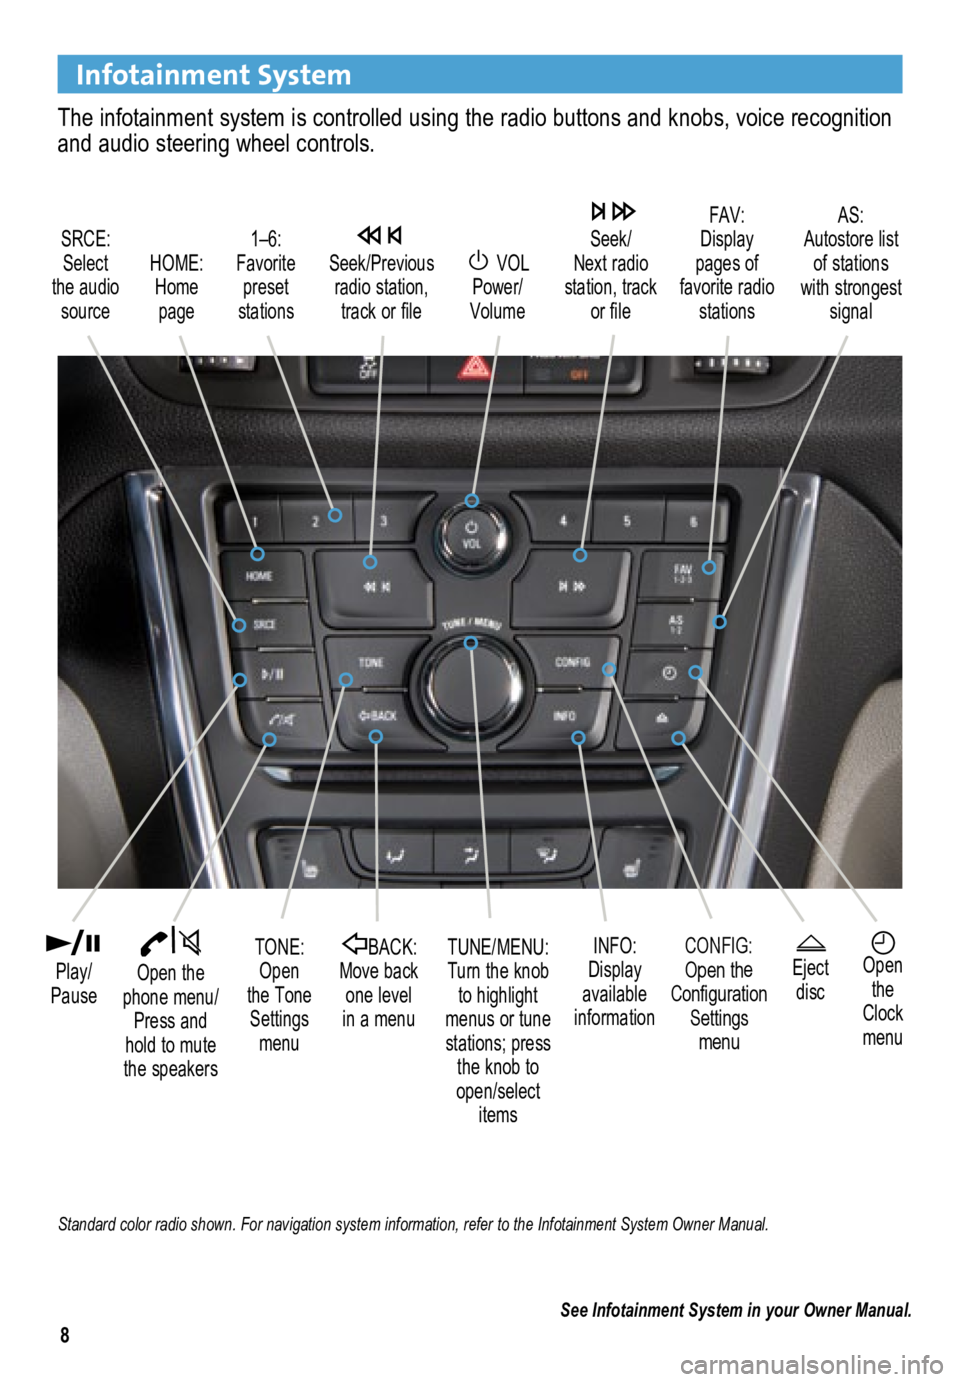 BUICK ENCORE 2013  Get To Know Guide 8
Infotainment System
The infotainment system is controlled using the radio buttons and knobs, voice recognition 
and audio steering wheel controls.
 VOL 
 
Power/ 
Volume
HOME: 
 
Home  page
  
Open 